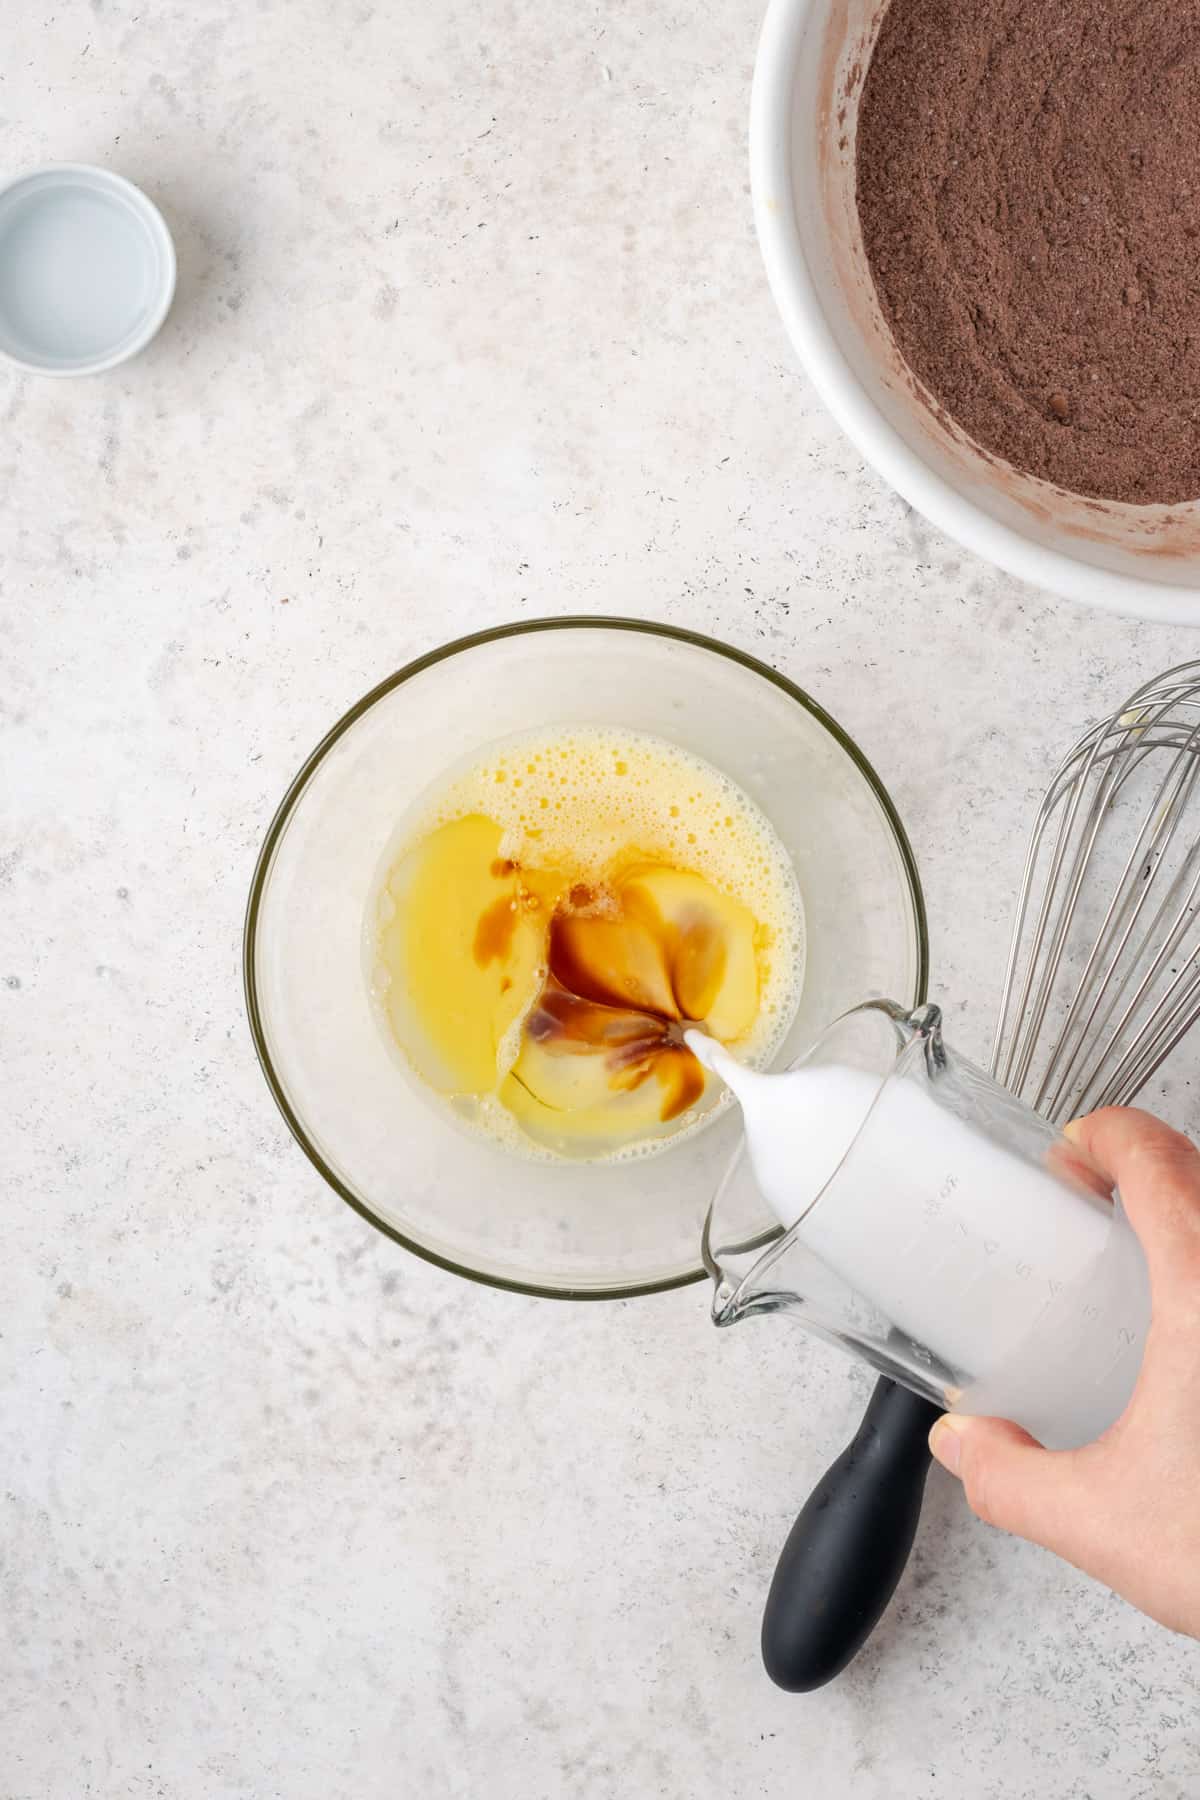 Oil, milk and vanilla being poured into the bowl with the beaten egg.